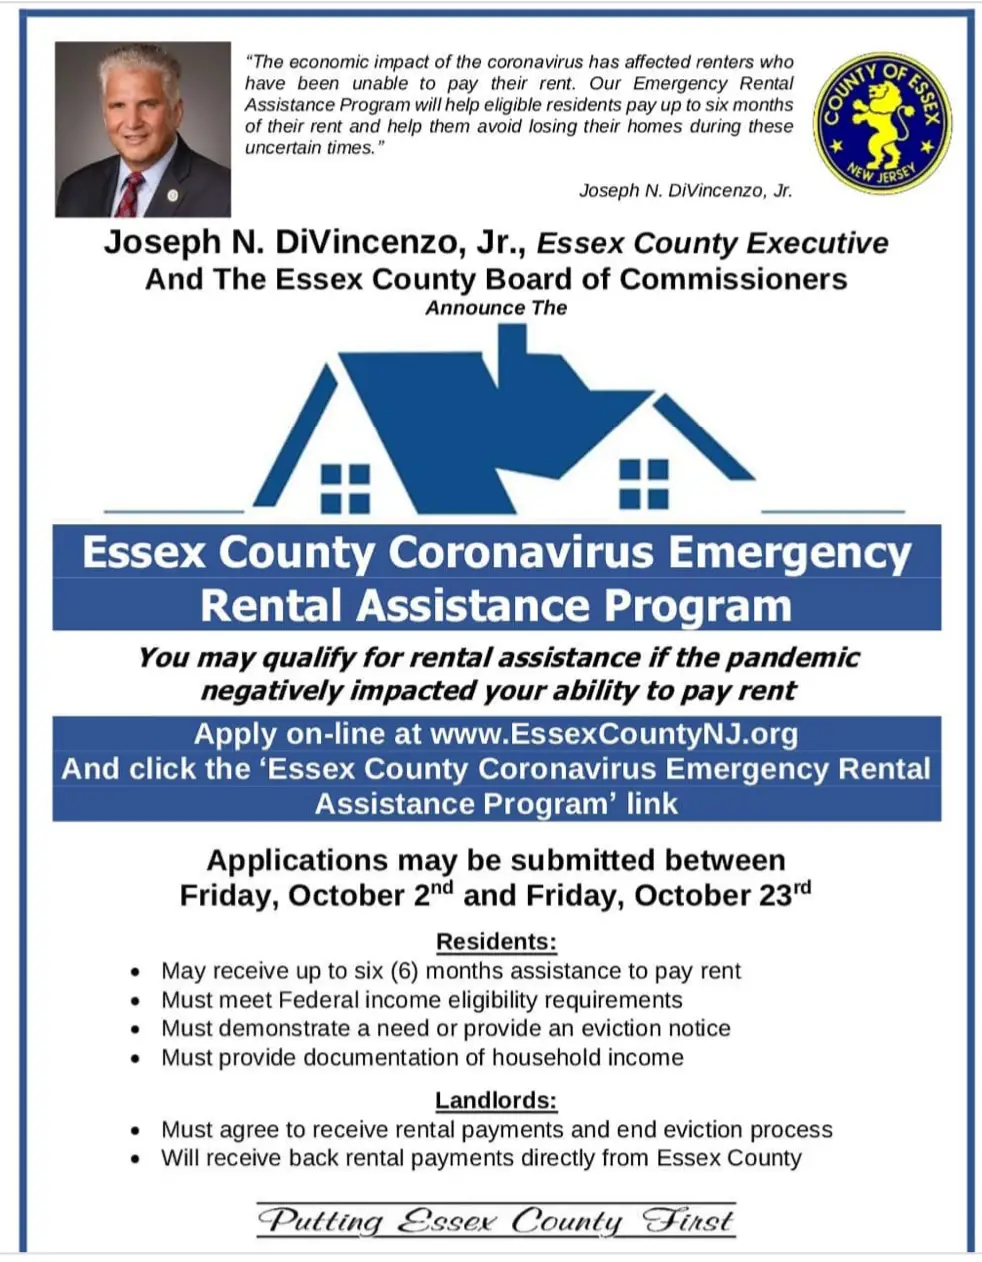 Emergency Coronavirus Rental Assistance for Essex County Residents